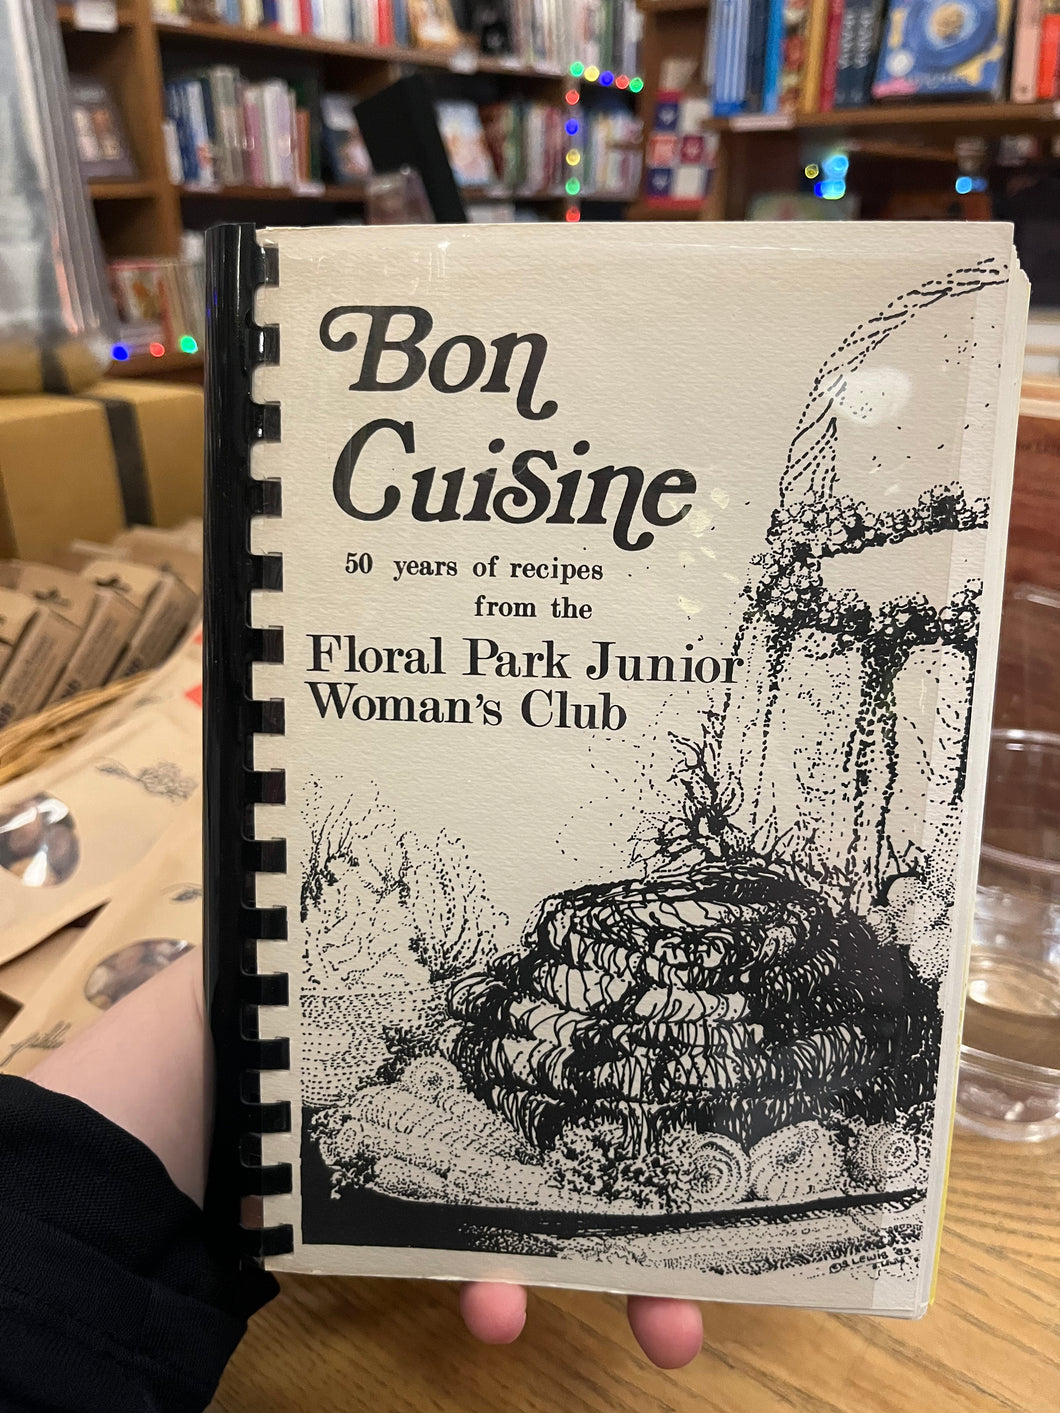 Bon Cuisine 50 years of recipes from the Floral Park Junior Woman's Club